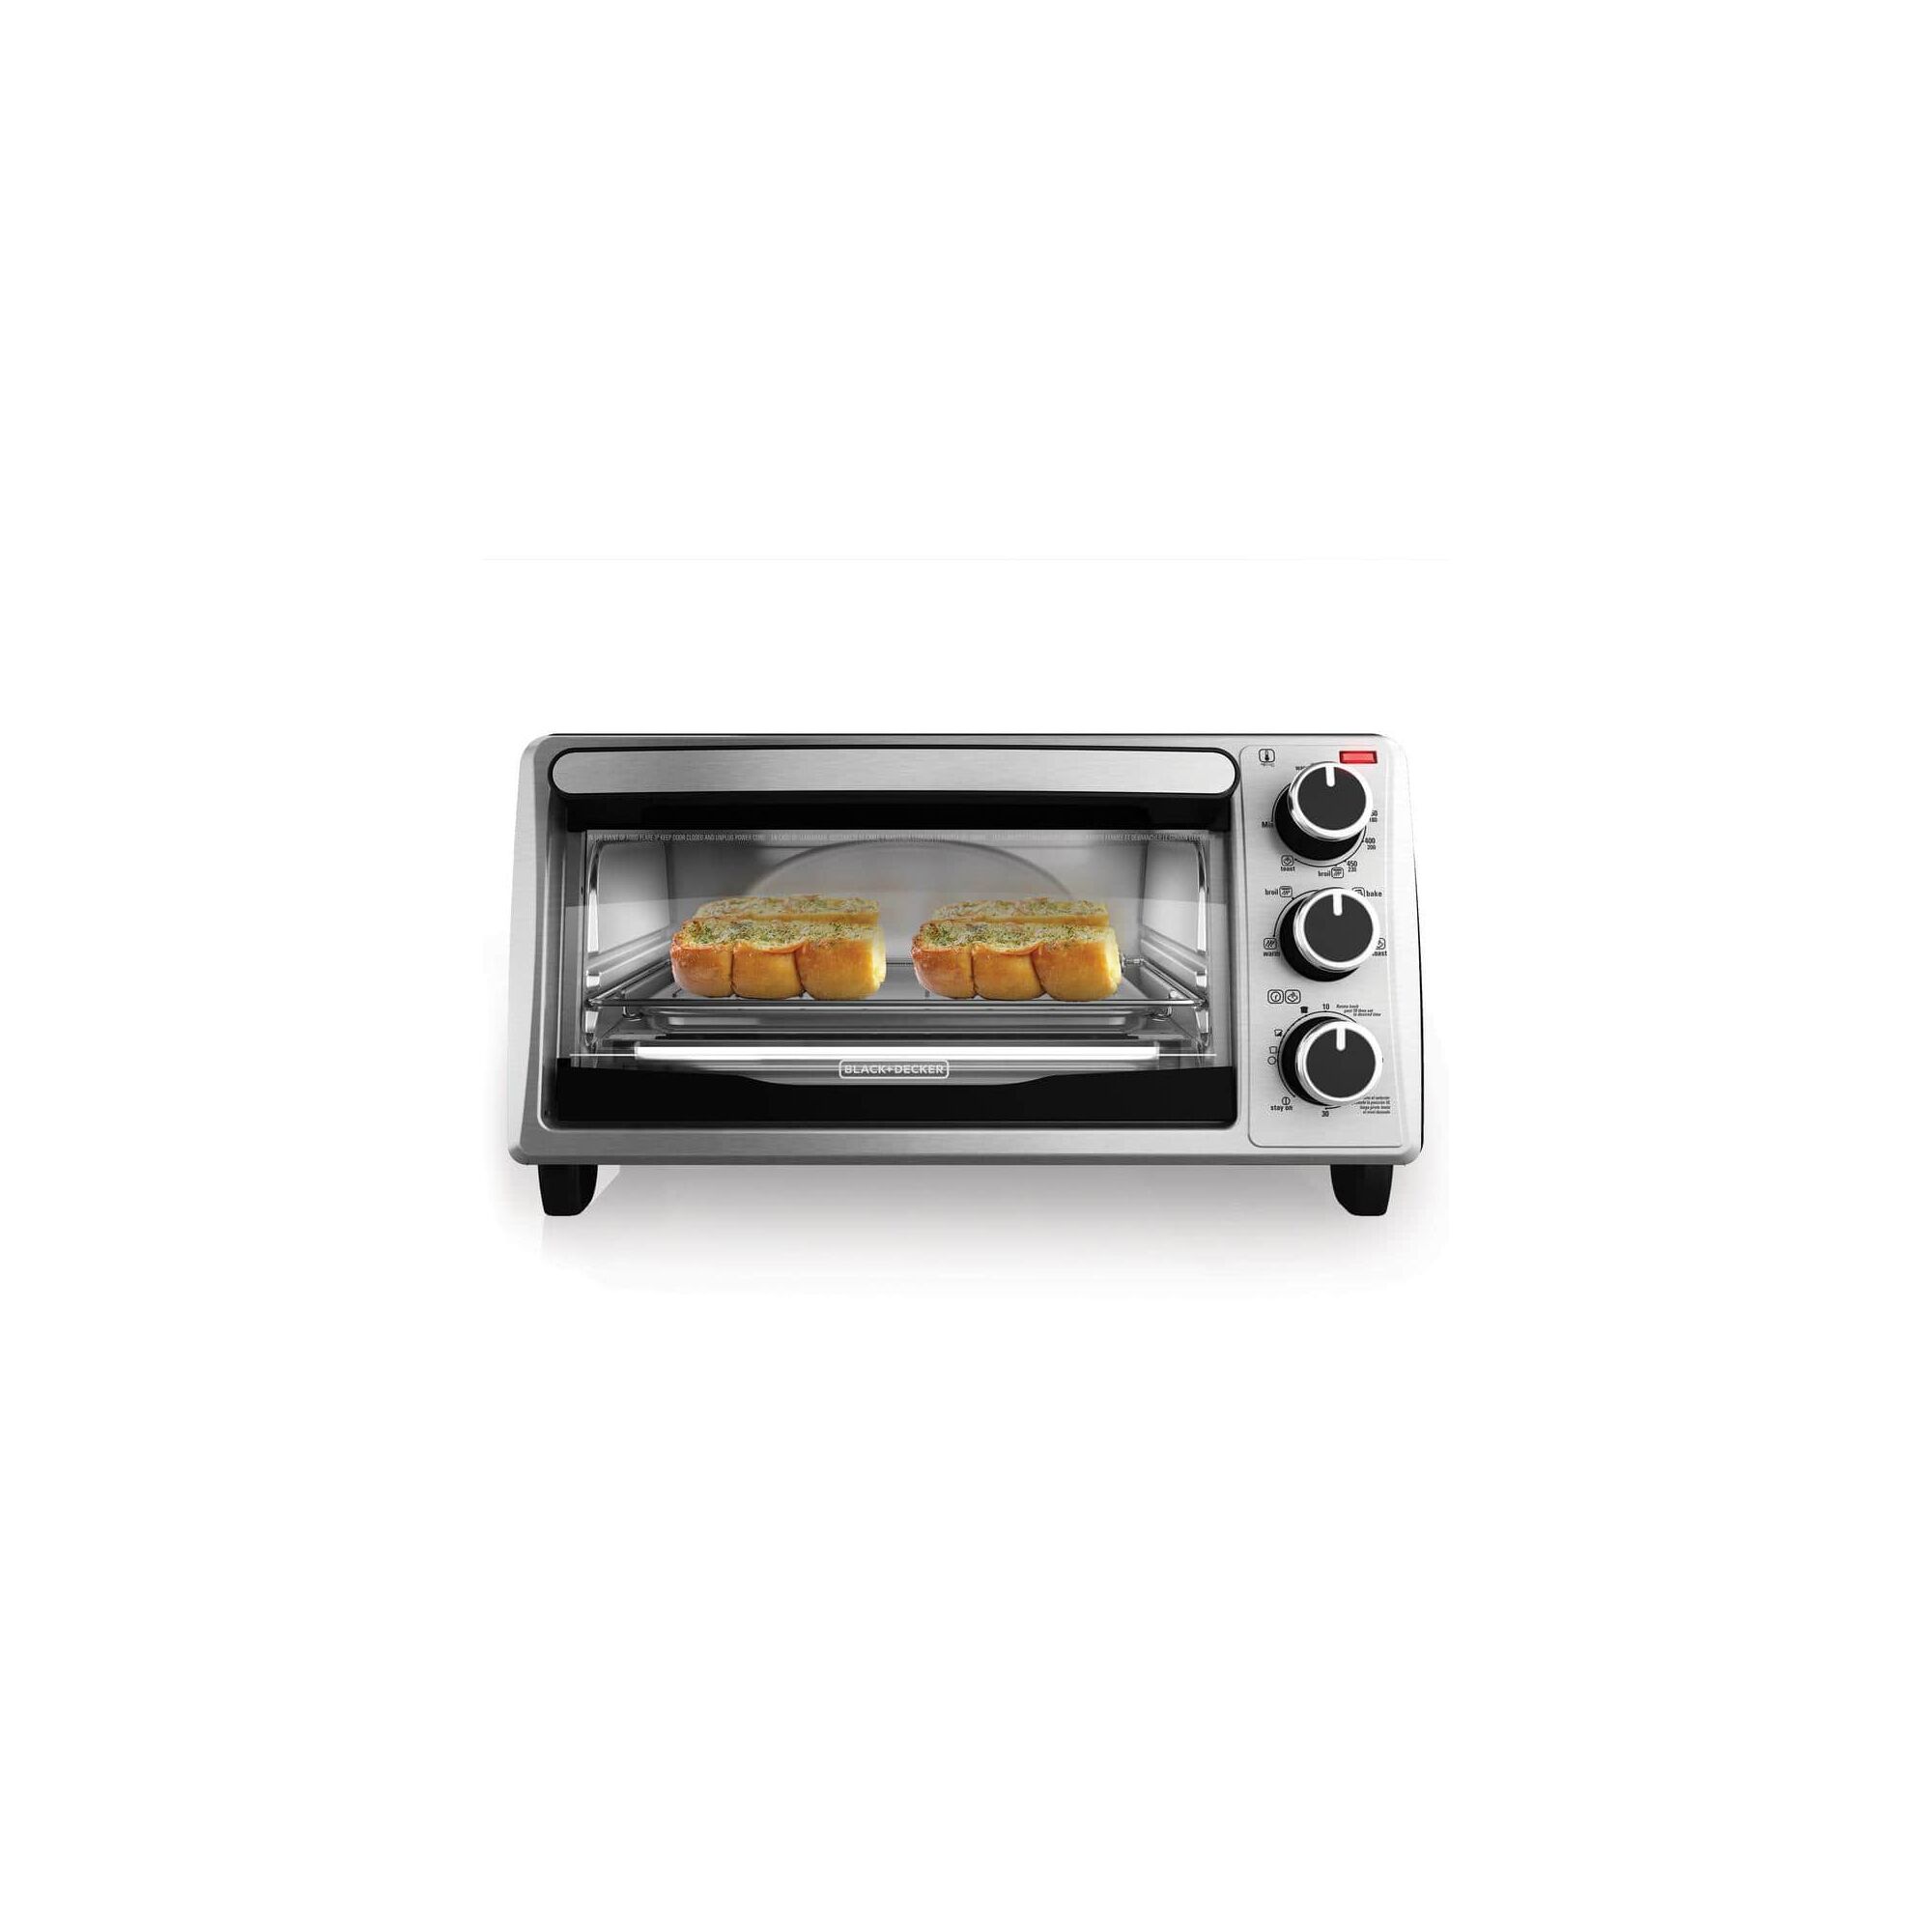 4-Slice Toaster Oven cooking garlic bread.